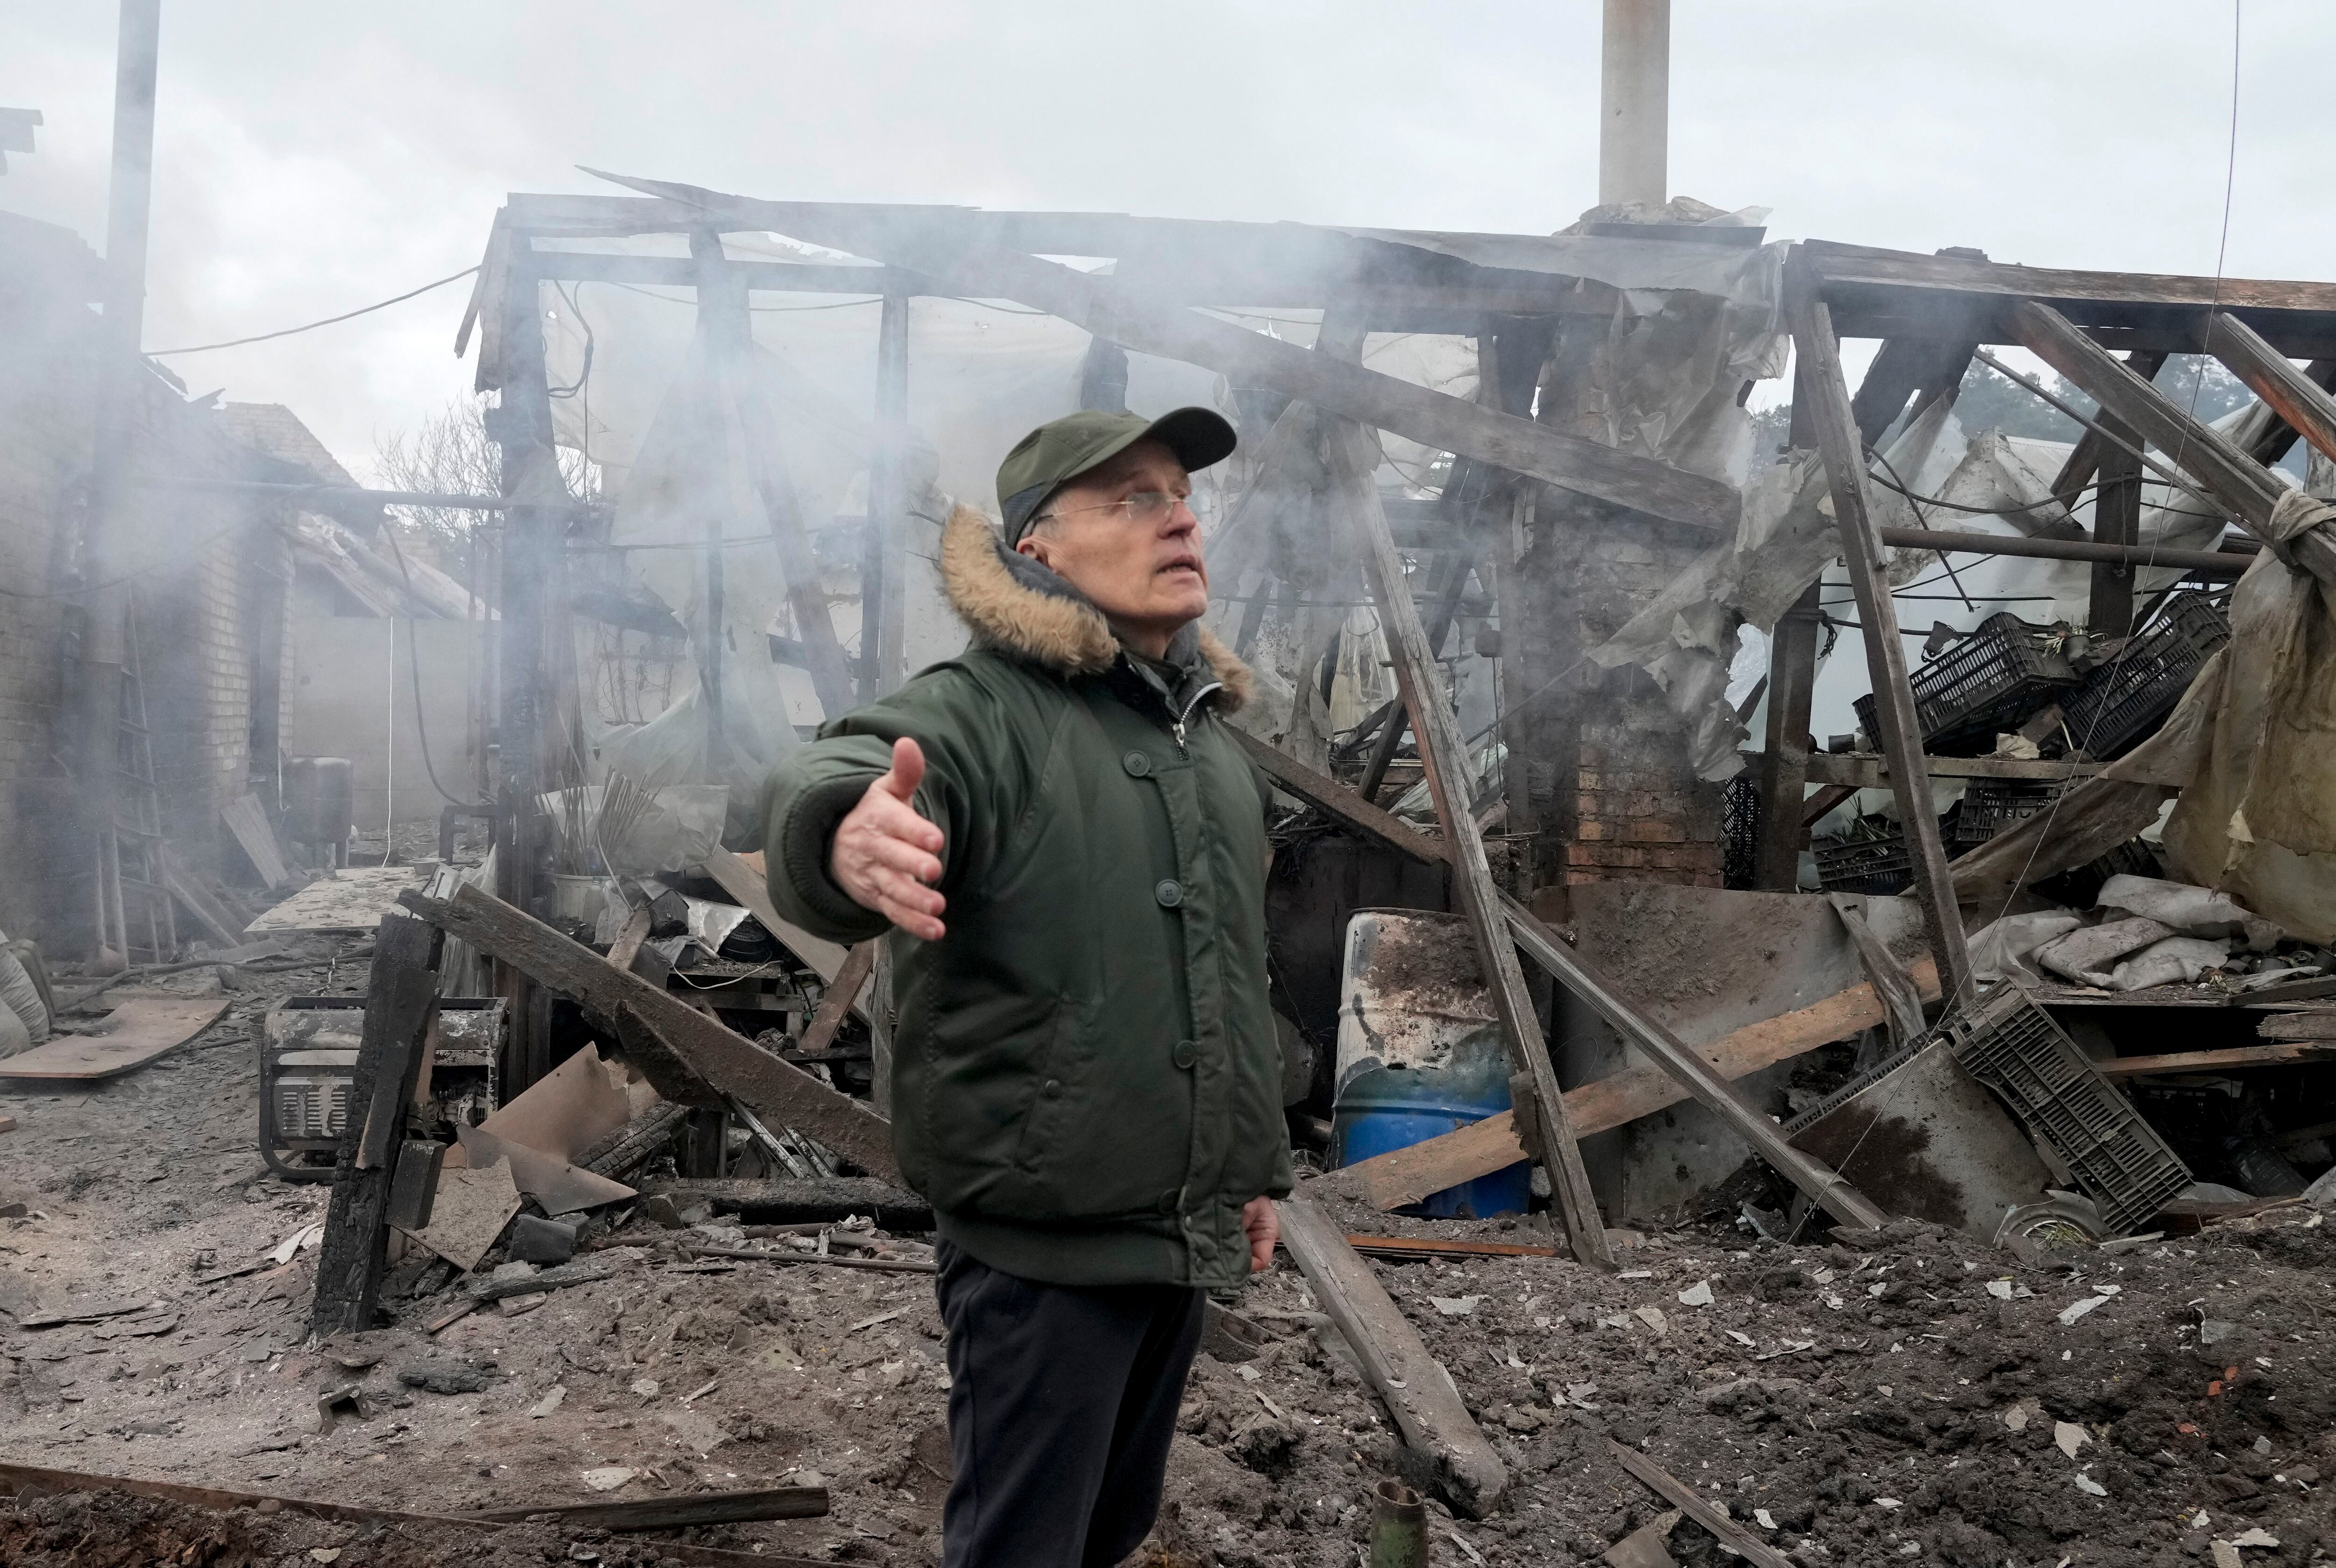 A man opens his arms as he stands near a house destroyed in the Russian artillery shelling, in the village of Horenka close to Kyiv, Ukraine, Sunday, March 6, 2022. On Day 11 of Russia's war on Ukraine, Russian troops shelled encircled cities, and it appeared that a second attempt to evacuate civilians from the besieged port city of Mariupol had failed due to continued violence. (AP Photo/Efrem Lukatsky)